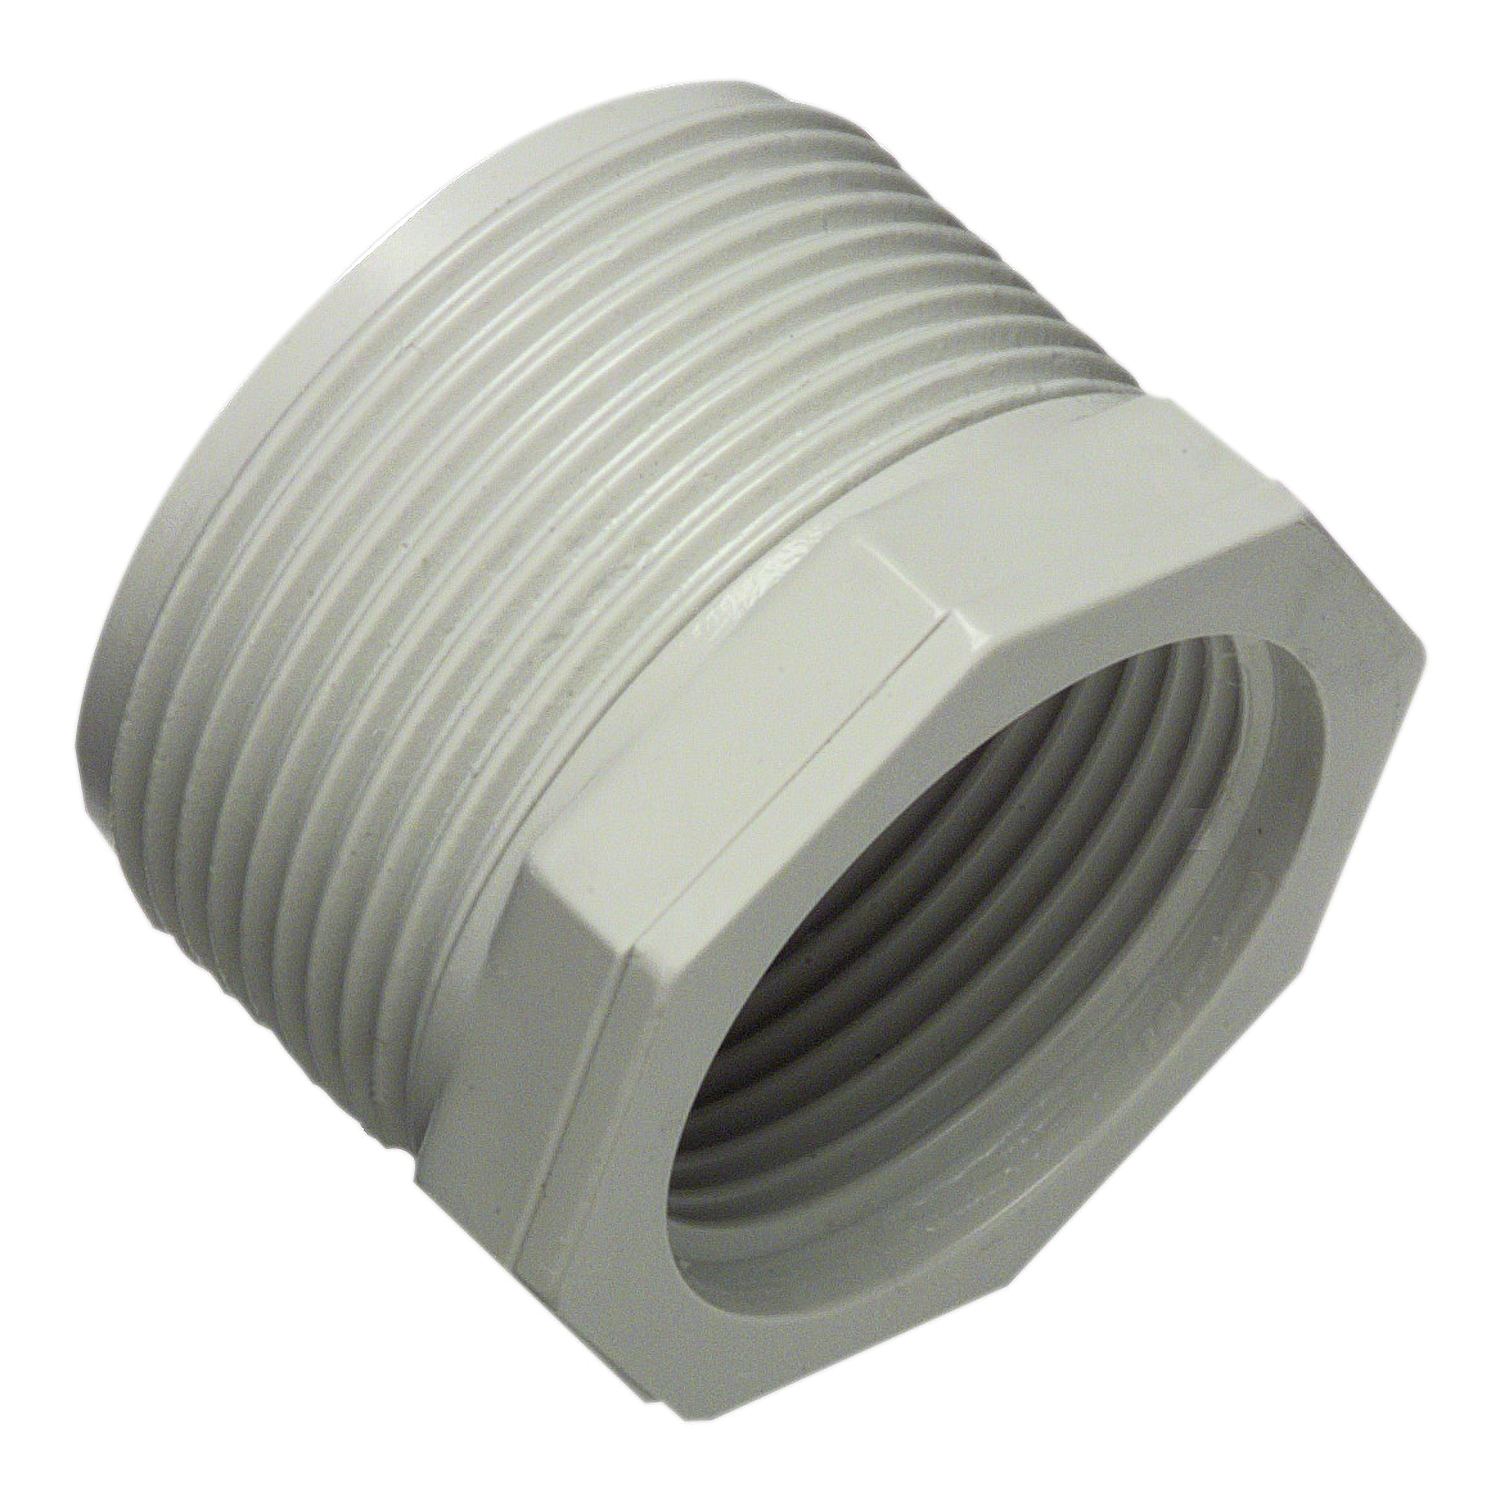 Solid Fittings - PVC, Screwed Reducers, 50mm - 40mm, Grey